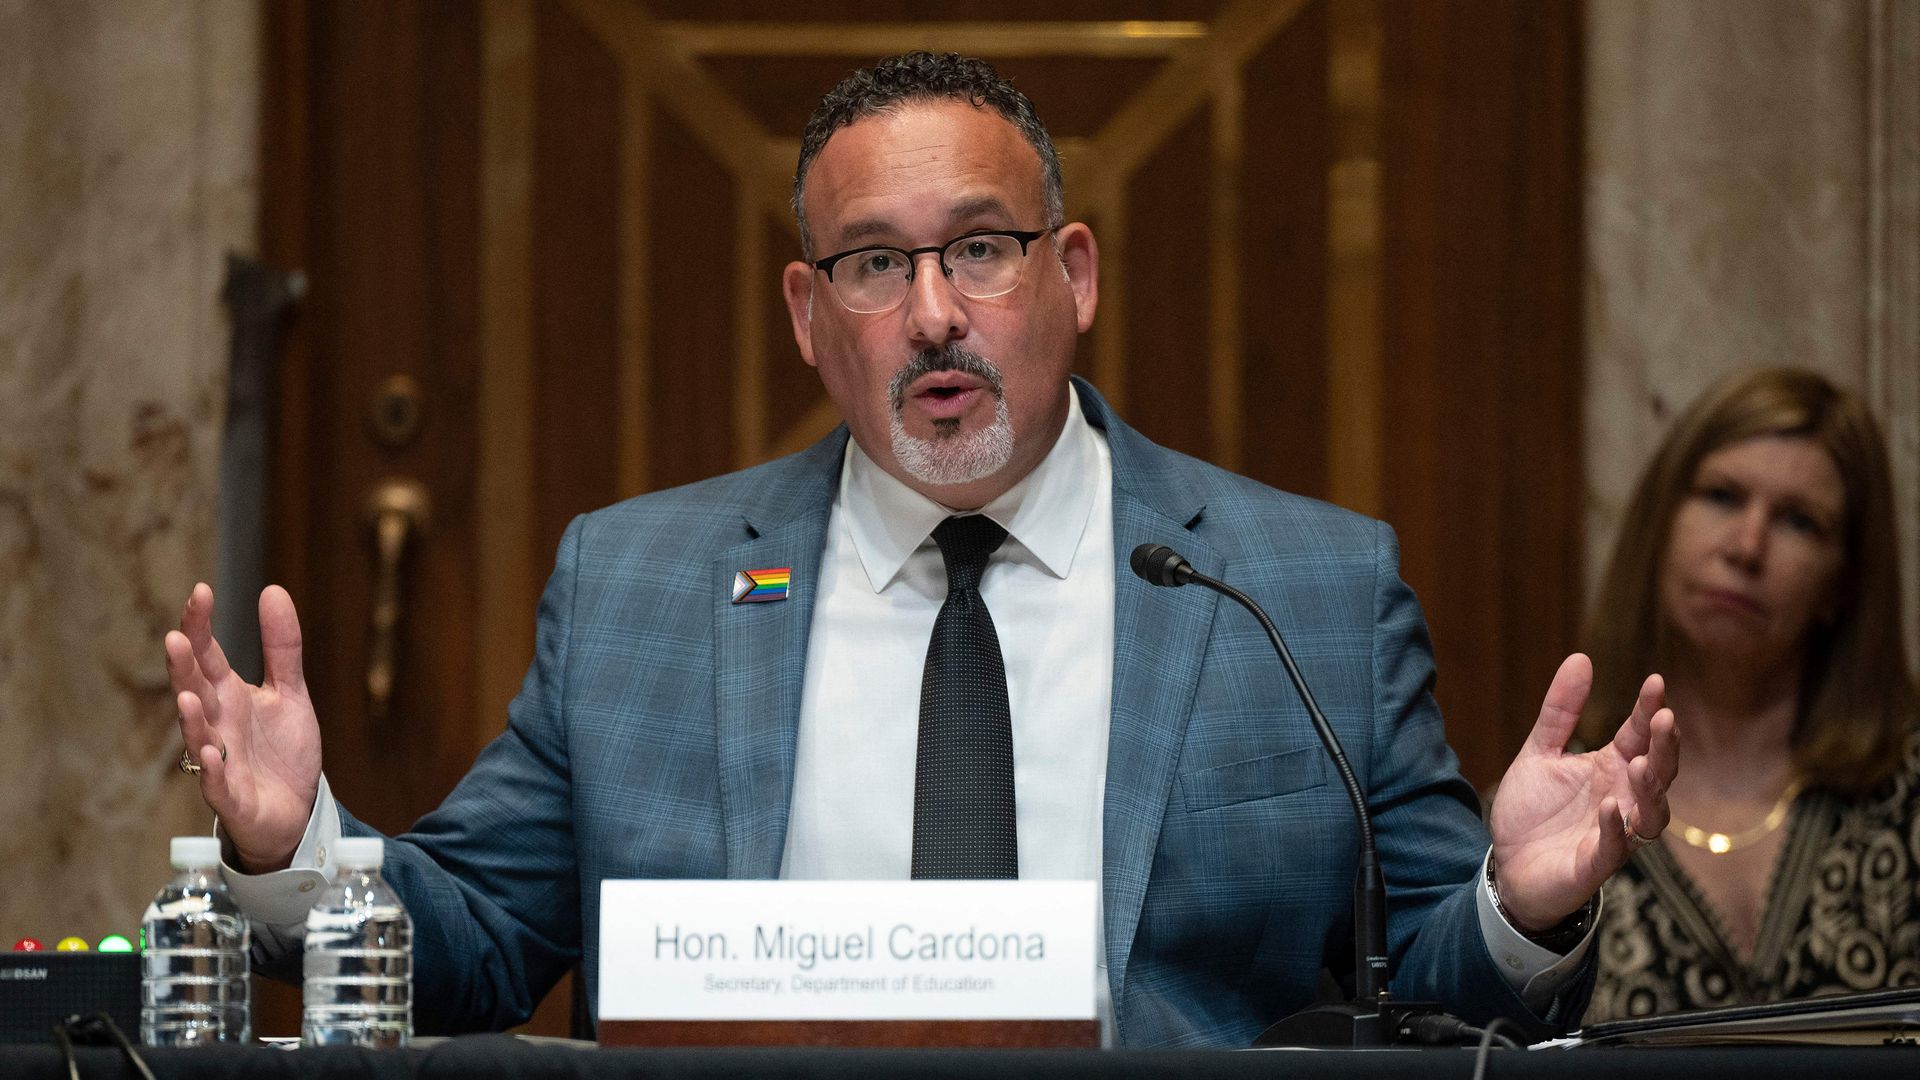 Education Secretary Miguel Cardona is seen speaking during a congressional hearing.